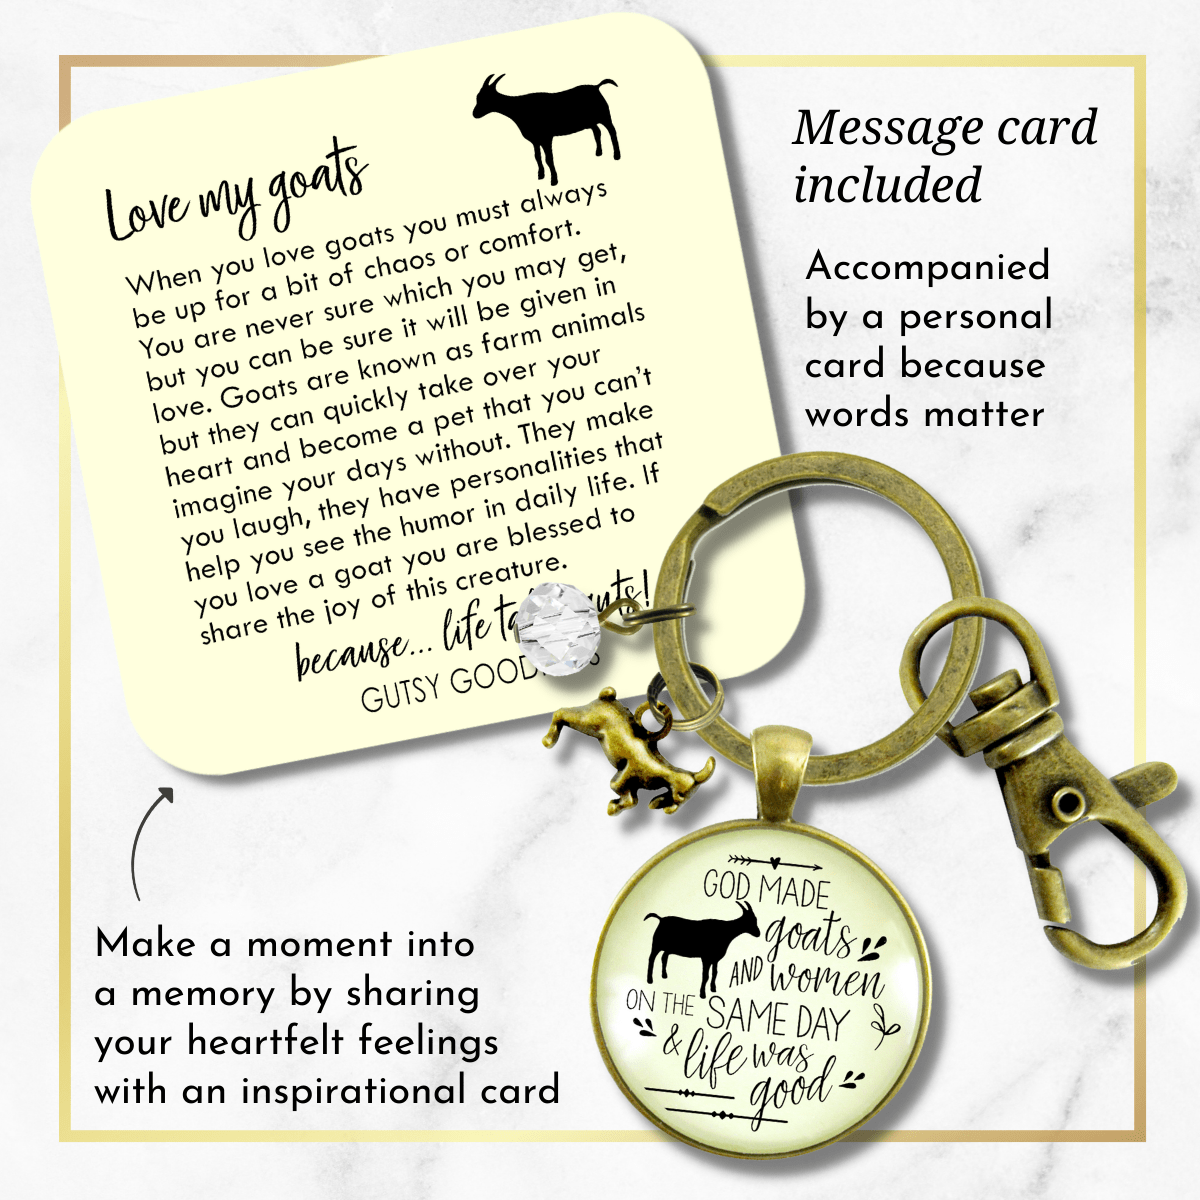 Goat Keychain Funny God Made Goats and Women It Was Good - Gutsy Goodness Handmade Jewelry;Goat Keychain Funny God Made Goats And Women It Was Good - Gutsy Goodness Handmade Jewelry Gifts